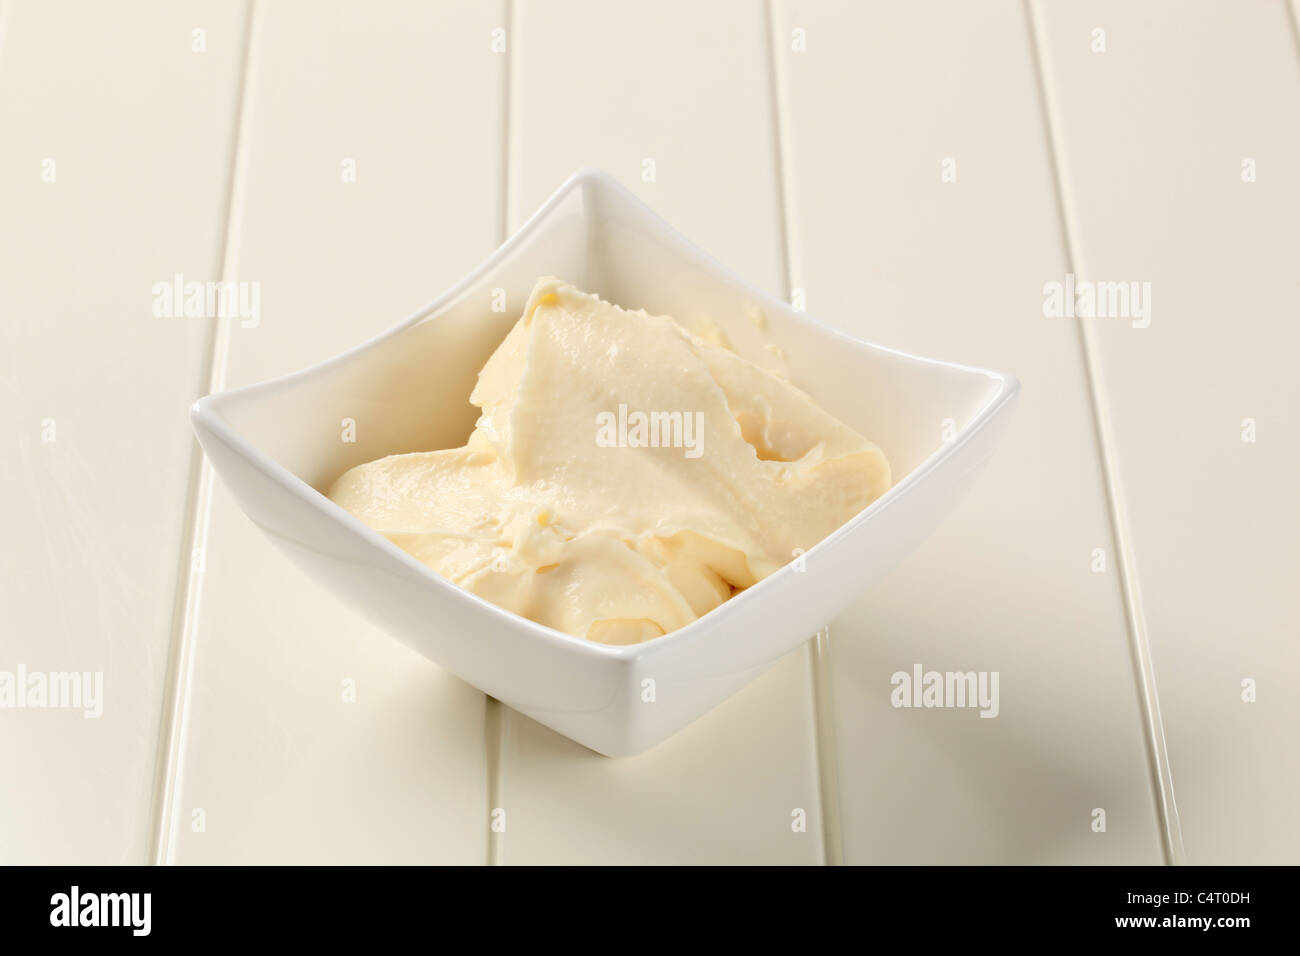 Bowl of creamy dipping sauce or spread Stock Photo